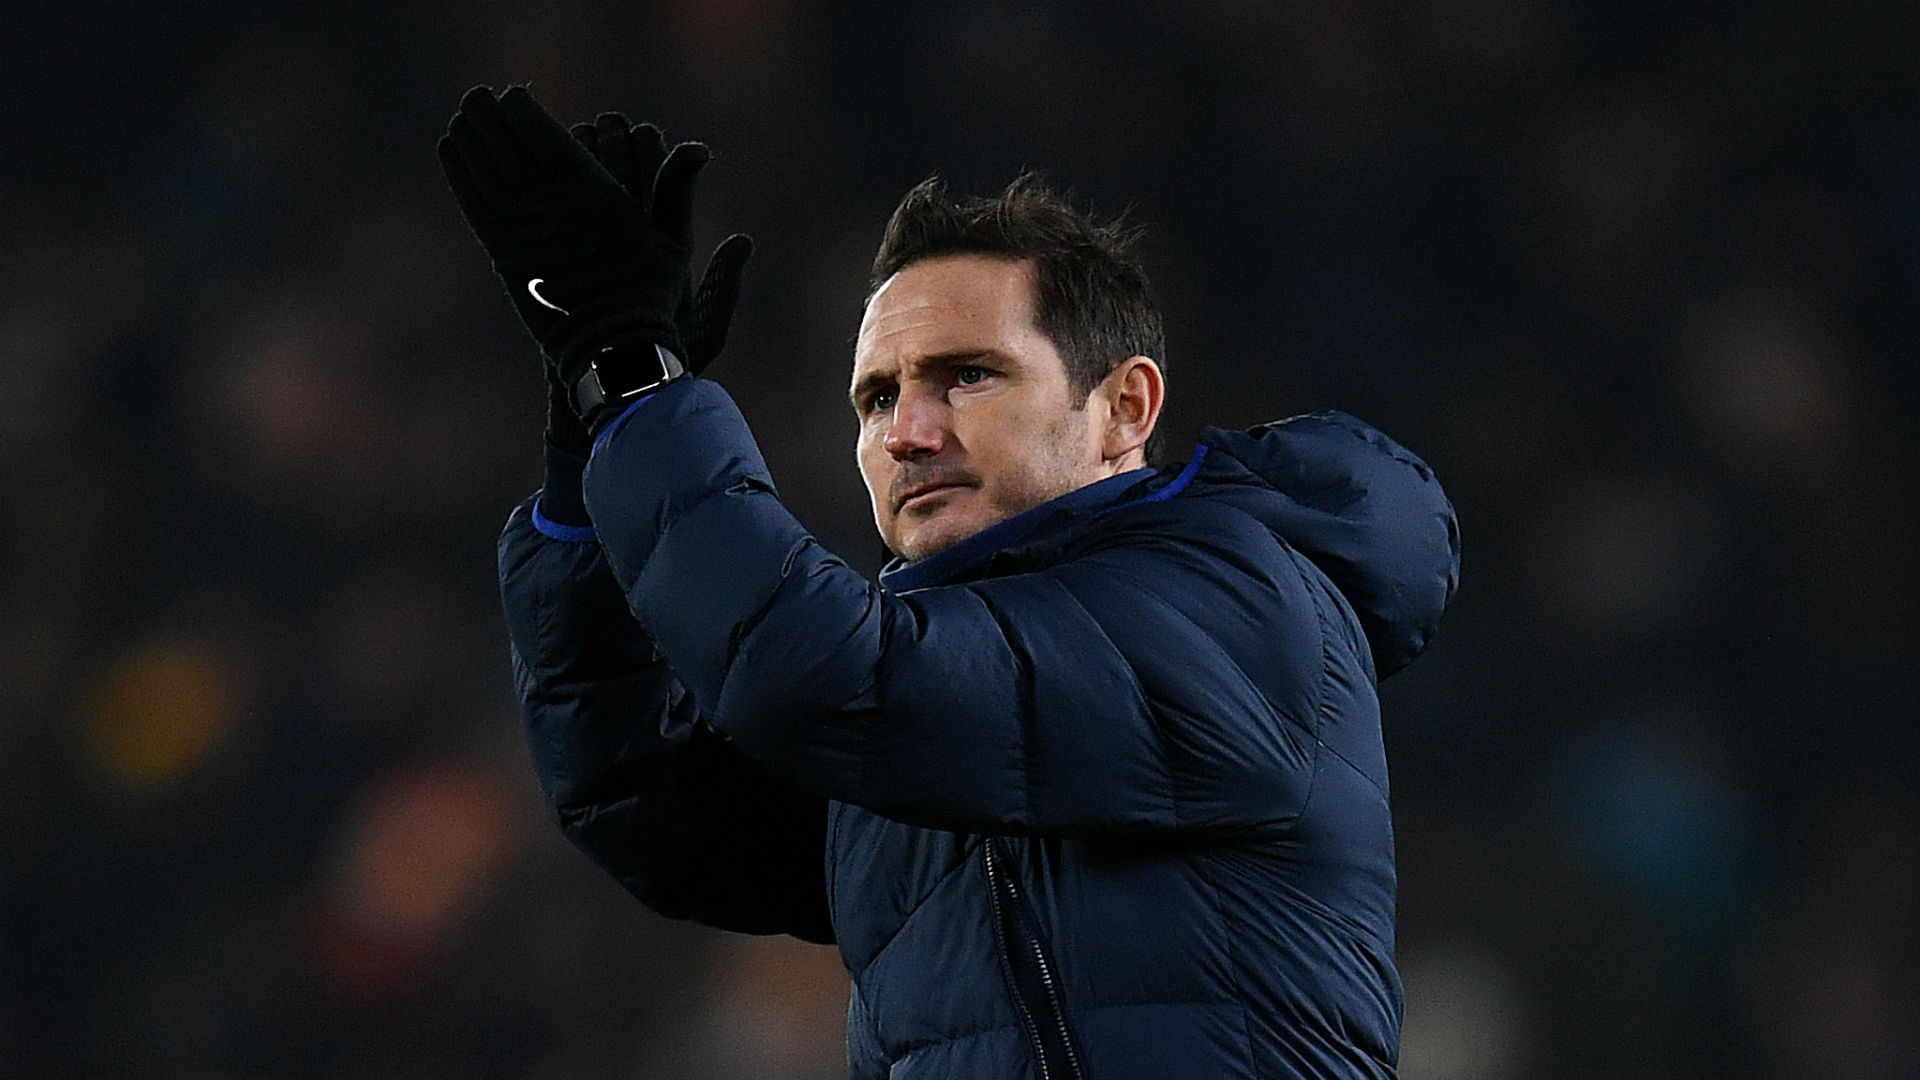 Chelsea may have a young squad, but Frank Lampard does not believe inexperience is the reason for their recent struggles.